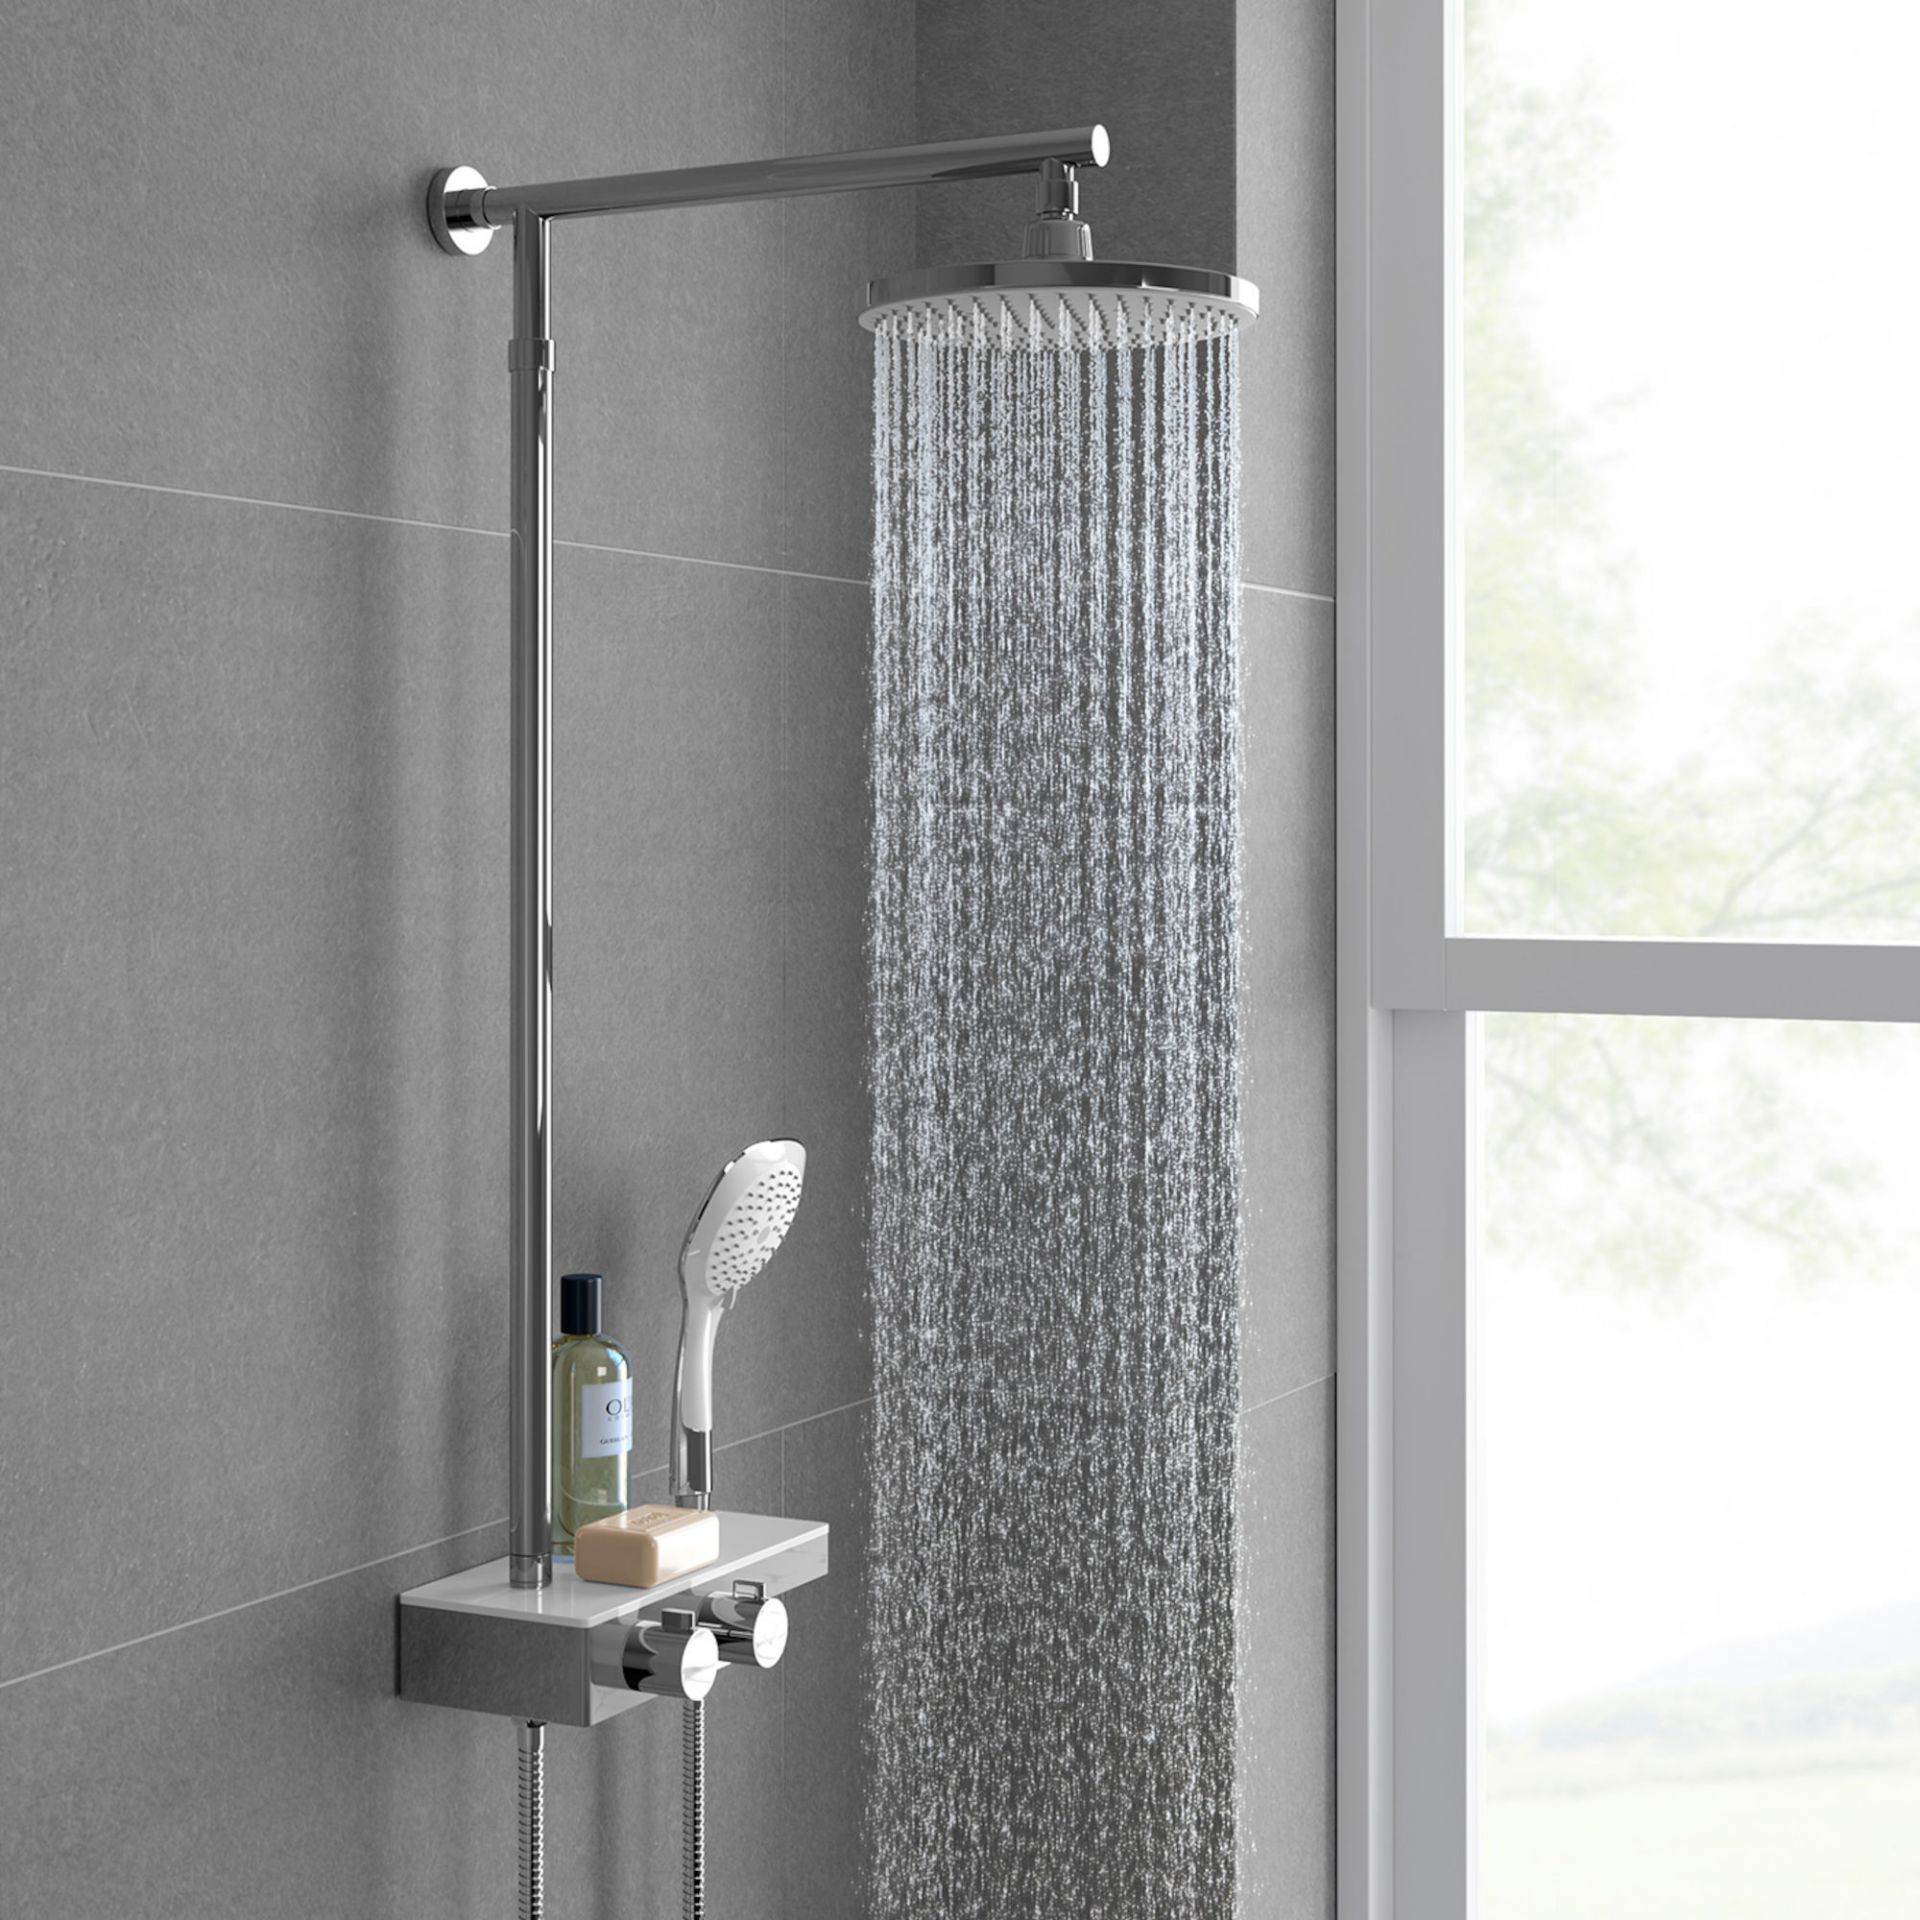 (MW41) Round Exposed Thermostatic Mixer Shower Kit Medium Head & Shelf. RRP £349.99. Cool to touch